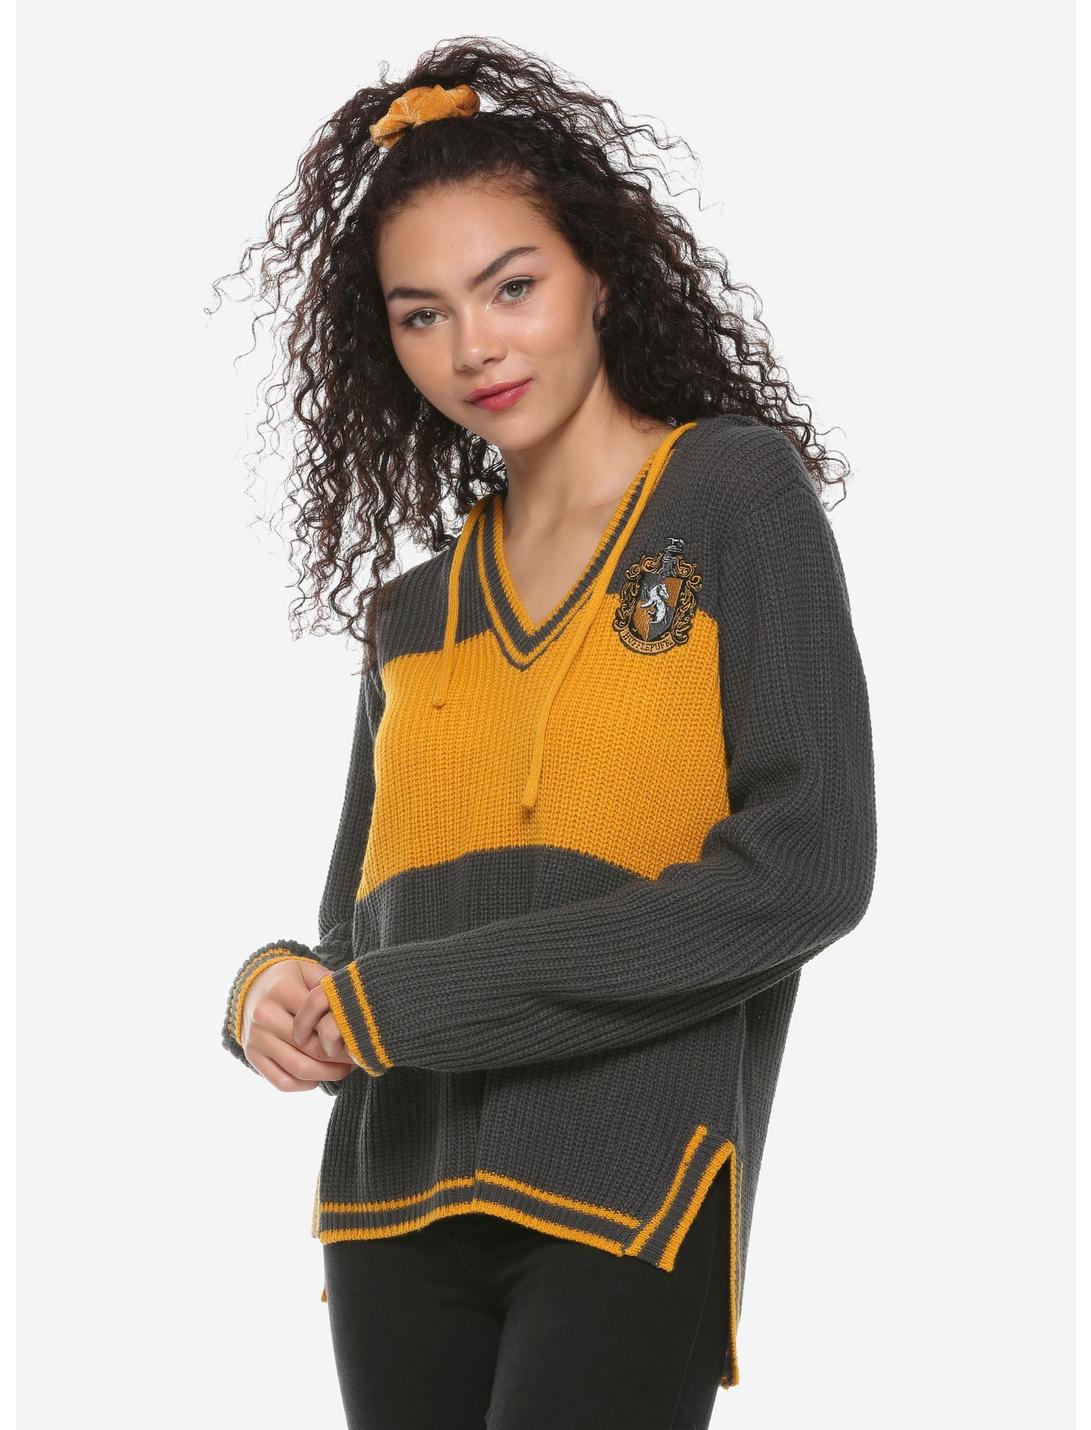 Harry Potter Hufflepuff Hooded Sweater, MULTI, hi-res